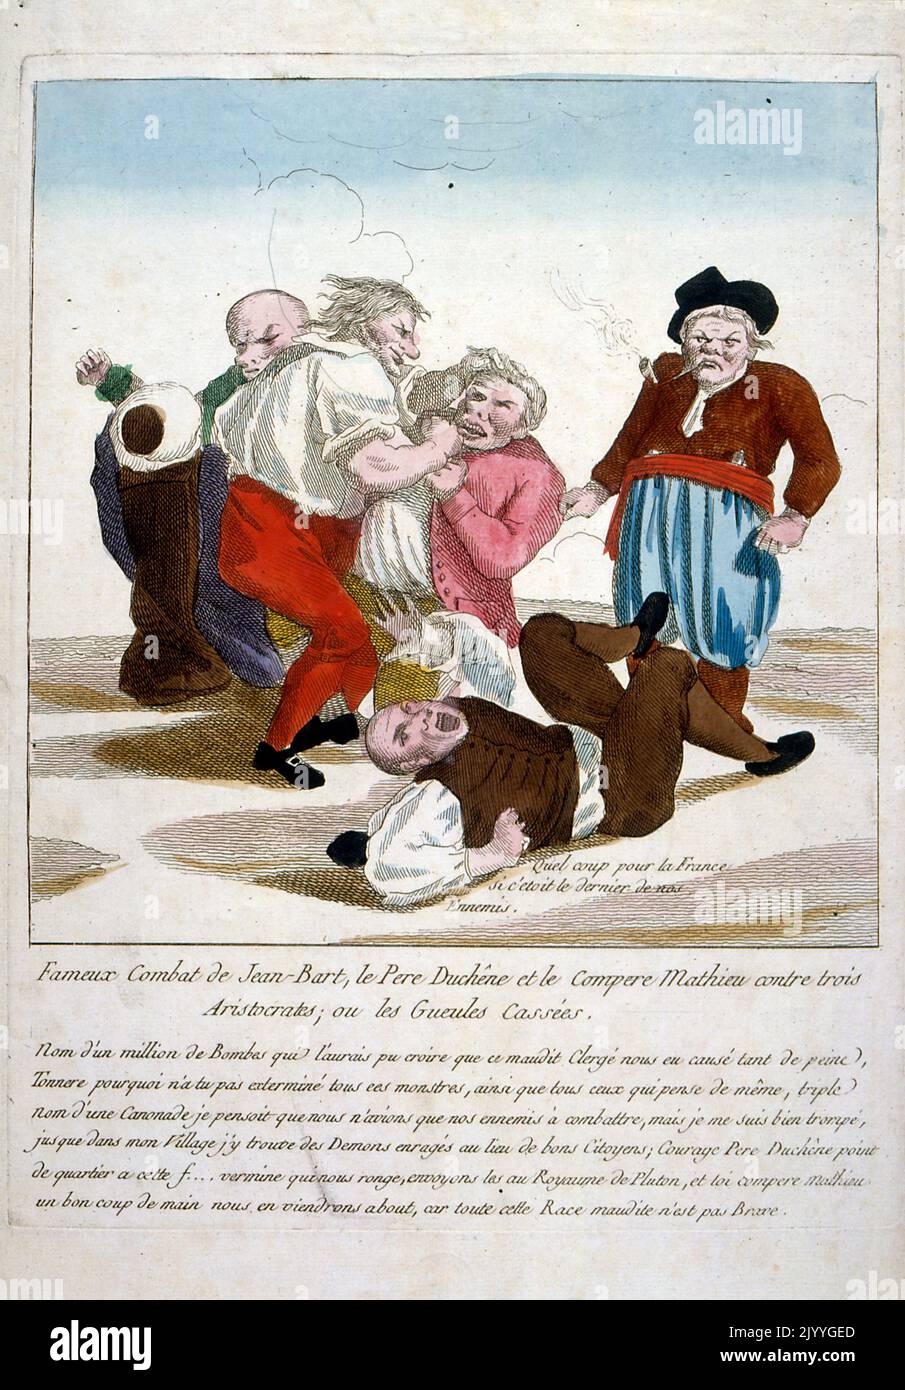 Coloured Illustration depicting men fighting in a brawl, which was the famous fight between Jean-Bart, Father Duchene and the accomplice Matthew, and three aristocrats where they beat them up; French Revolution. Stock Photo